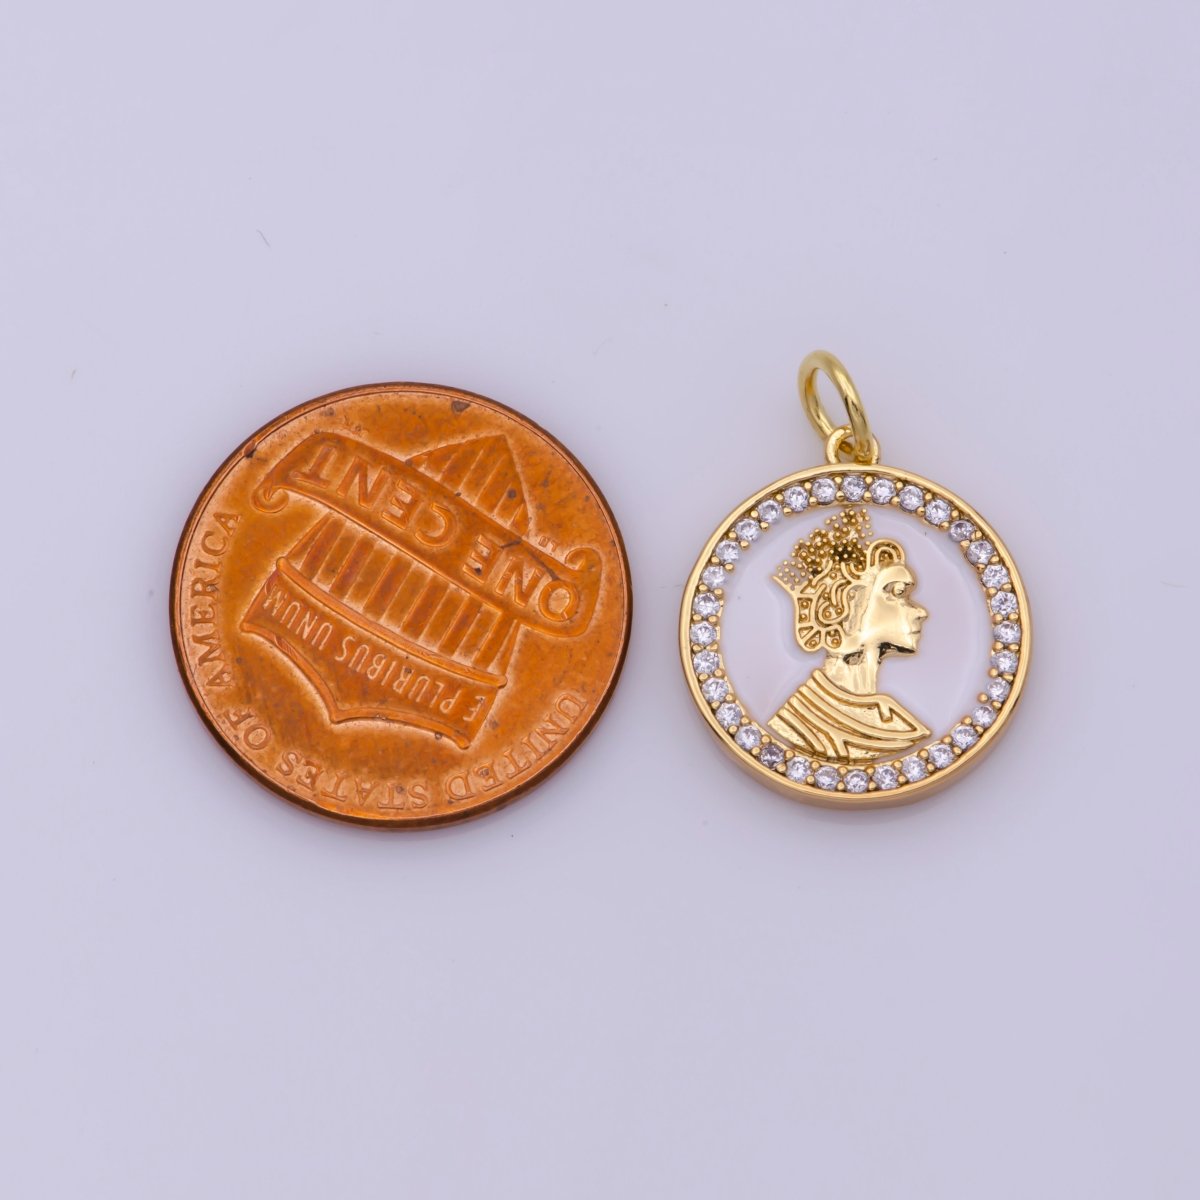 Mini English Queen Elizabeth coin medal 18k Gold Filled coin Charm Micro Pave Enamel White Charm N-199 - DLUXCA